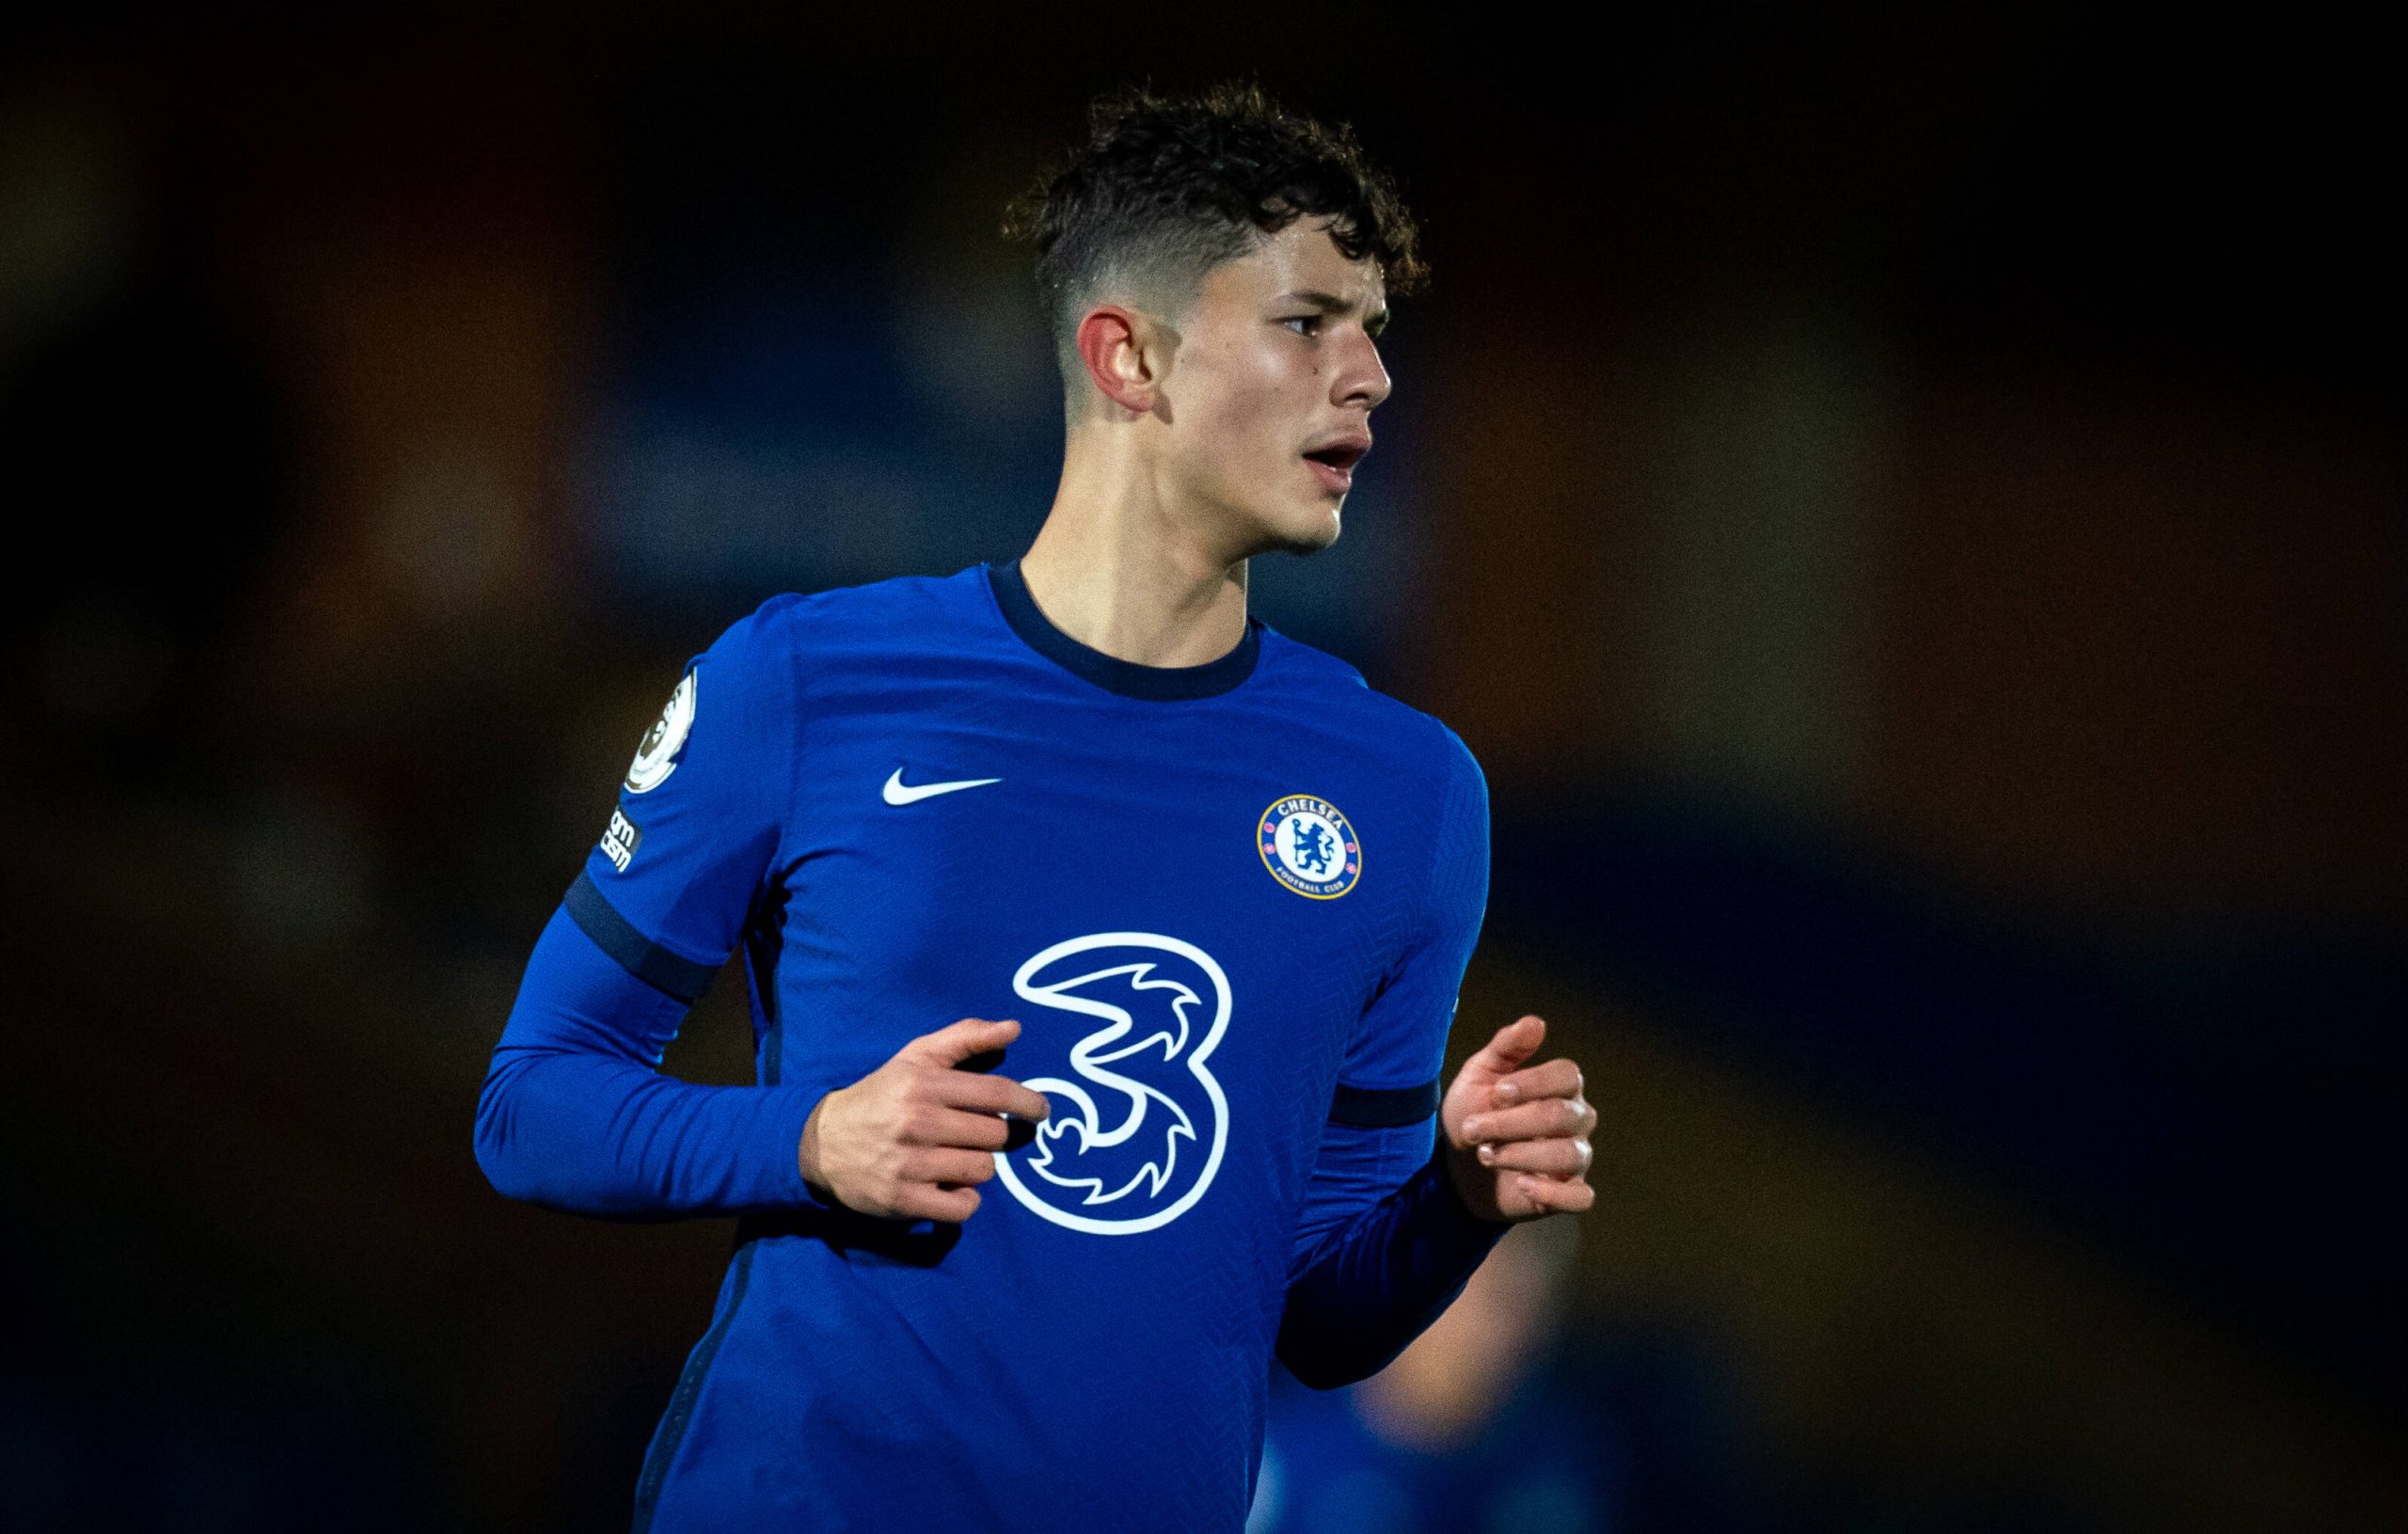 Jude Soonsup-Bell of Chelsea U23 during the Premier League 2 match between Chelsea U23 and Tottenham Hotspur U23 at the